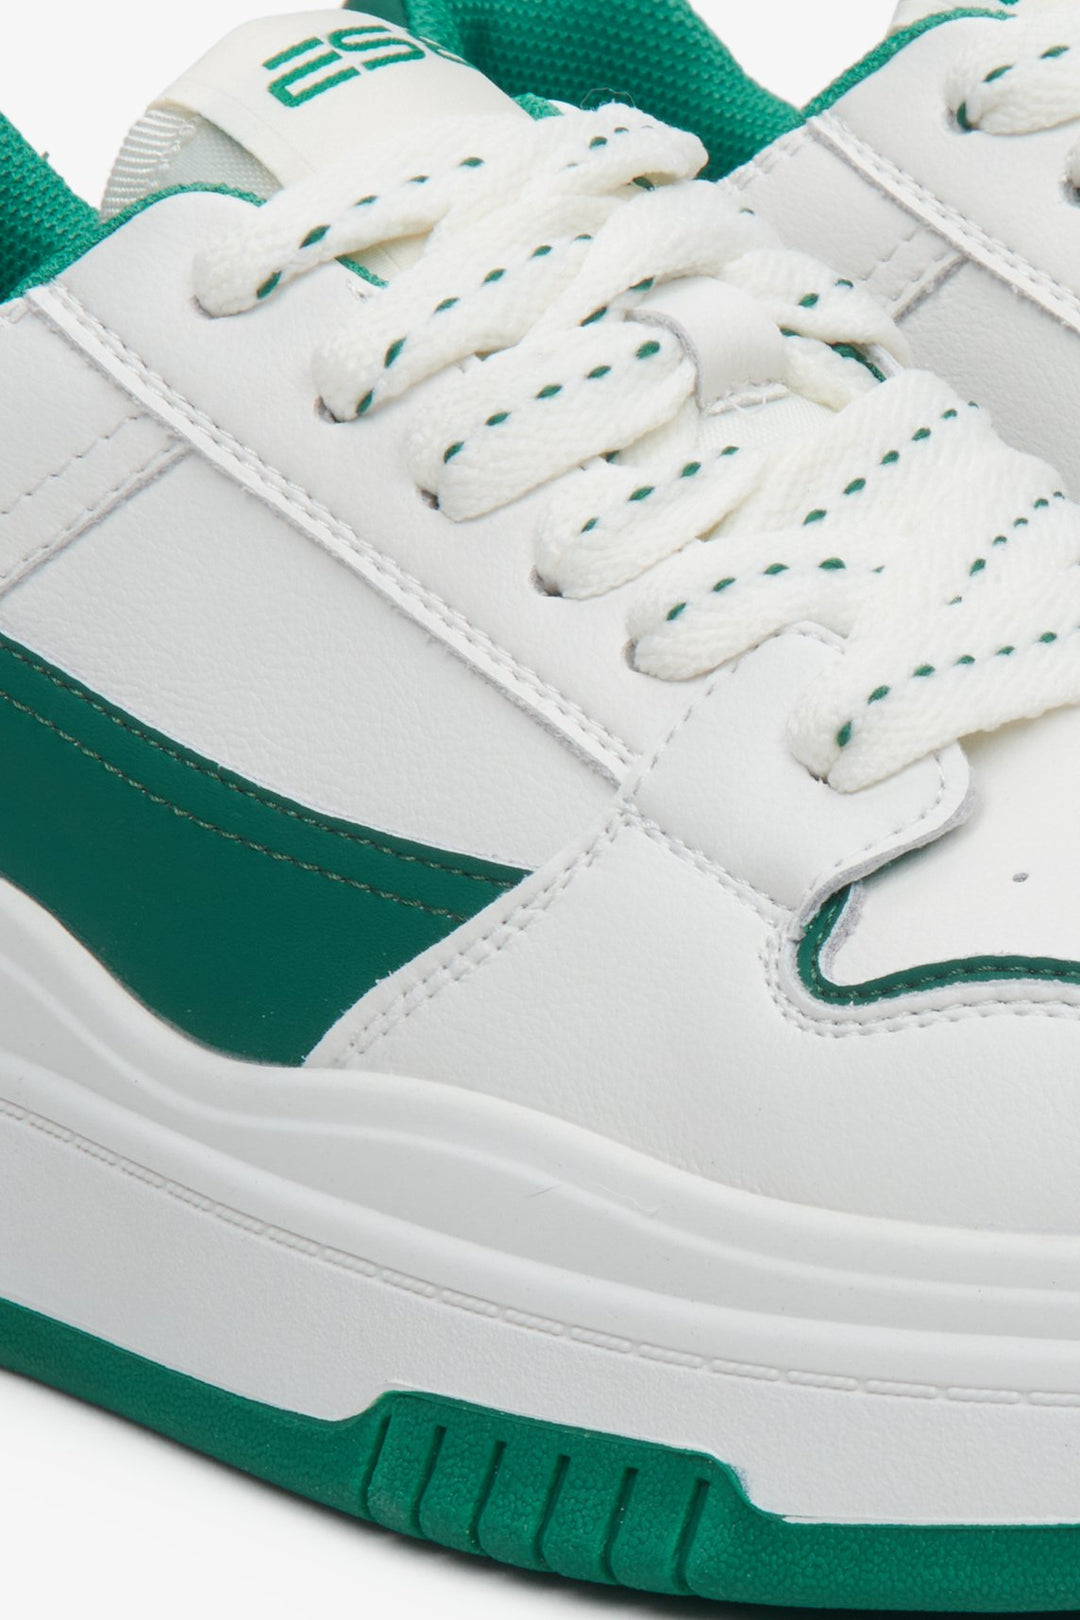 Sophisticated women's white and green leather sneakers ES8 ER00113314 - close-up on details.